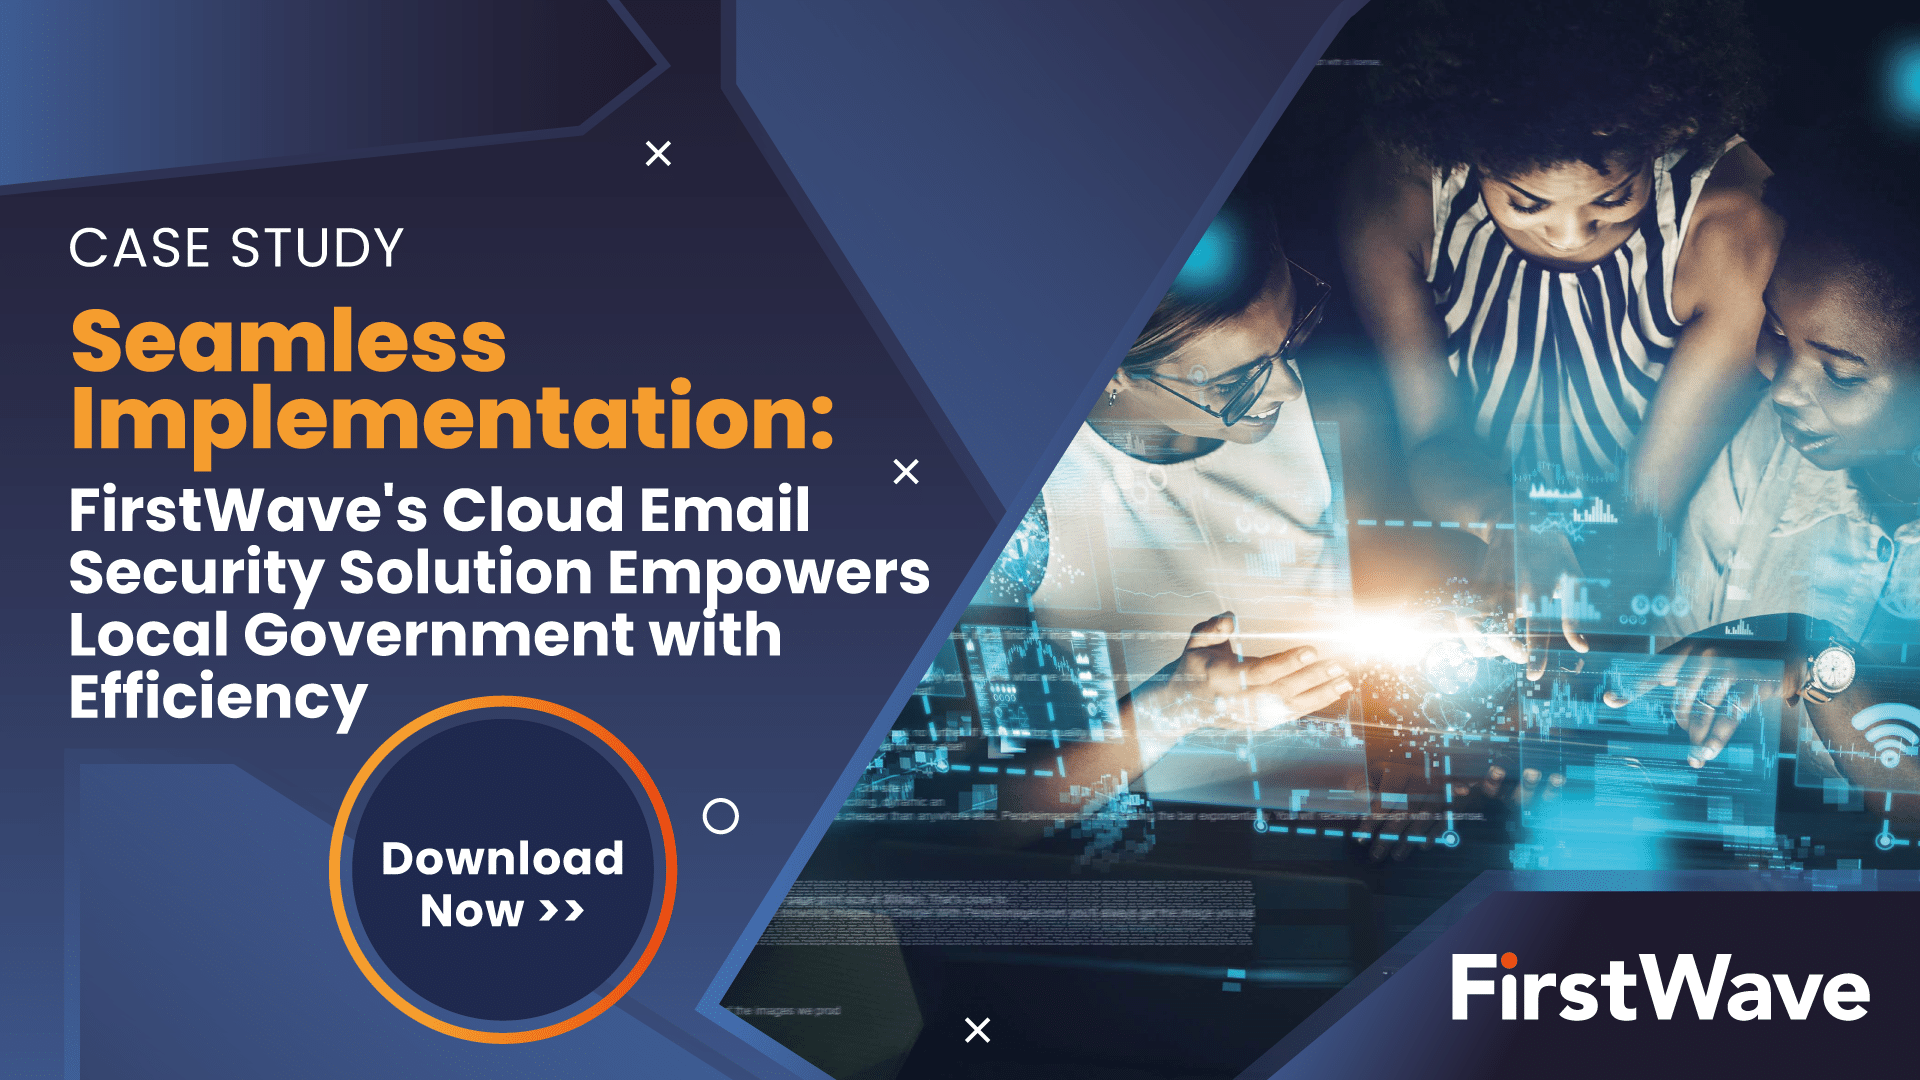 Easy & Quick Deployment of An Efficient Cloud Email Security Solution - Featured Image